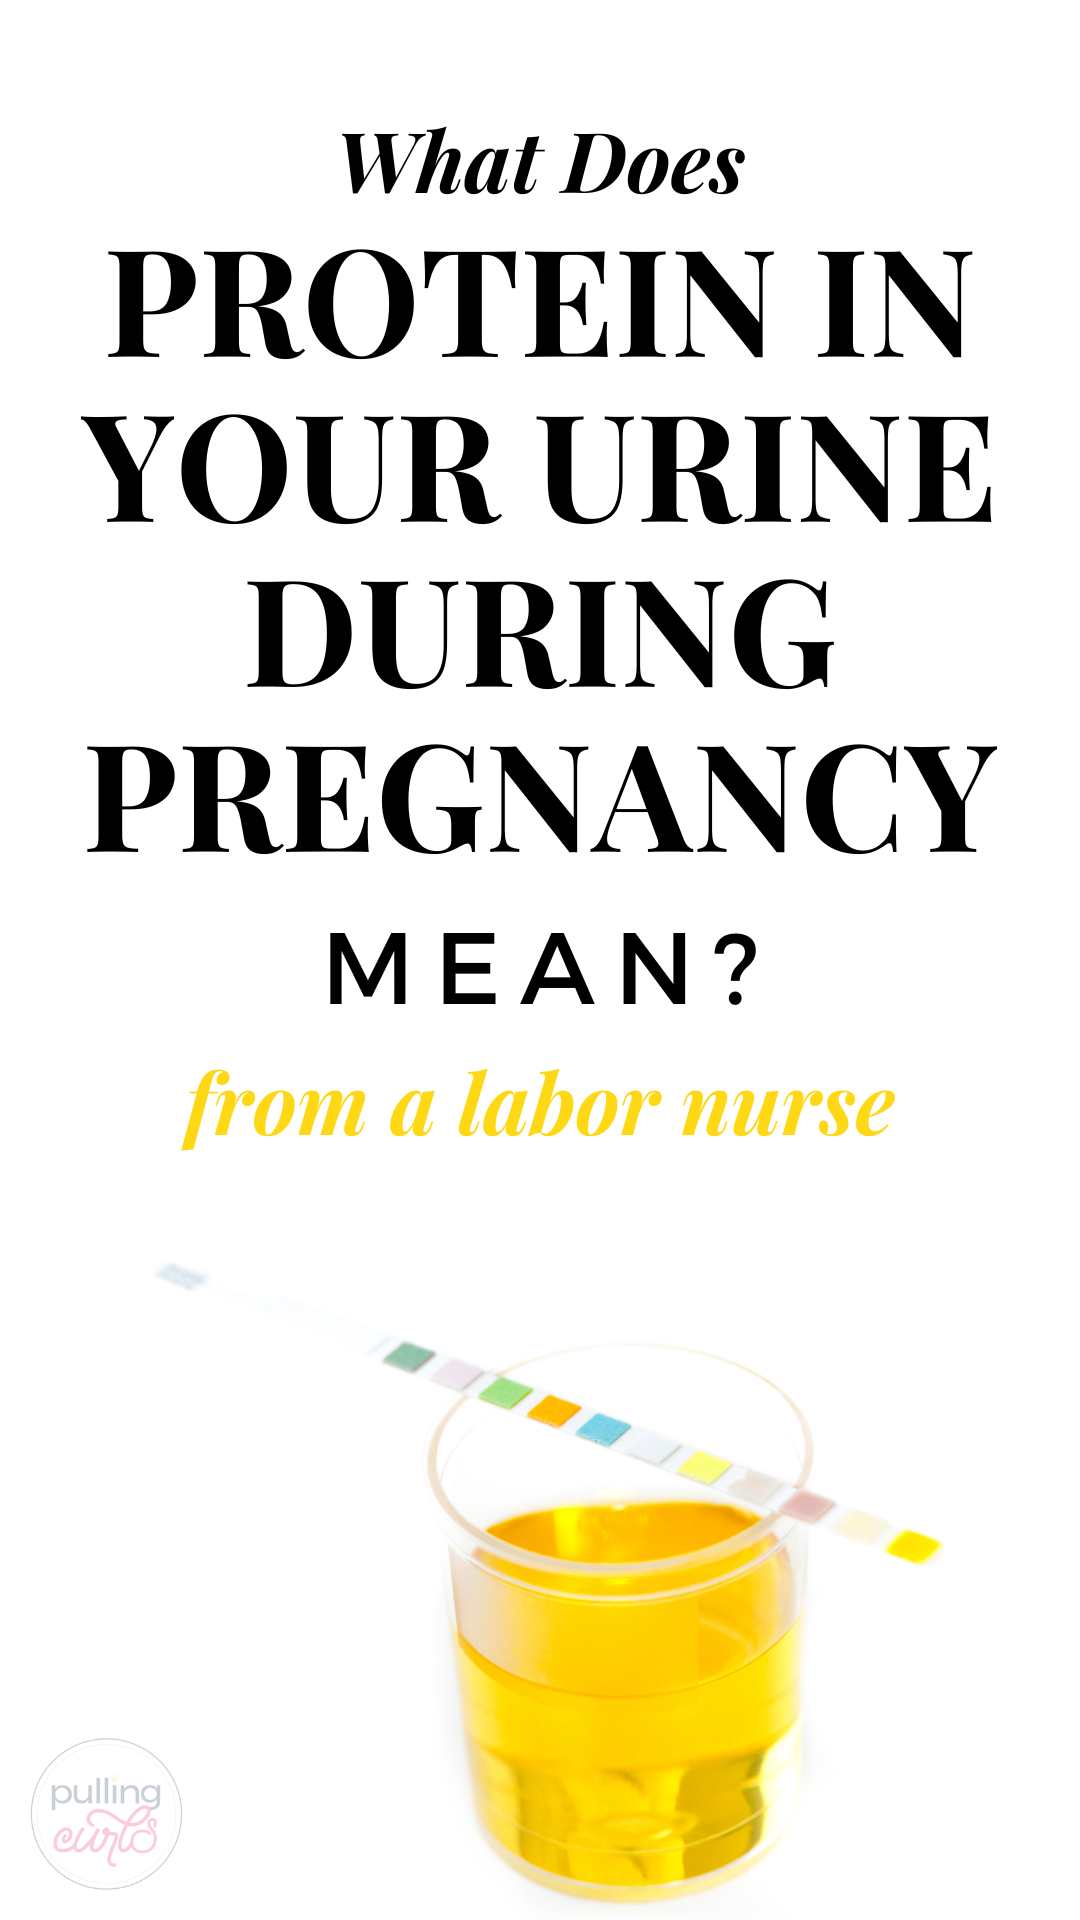 Having protein in your urine while as a pregnant woman isn't too unusual, but when the results start to be +1 or +2 your doctor will start to become more concerned, as you enter the third trimester. Let this L&D RN tell you exactly why this happens, why they test your urine sample and why it's a problem. via @pullingcurls